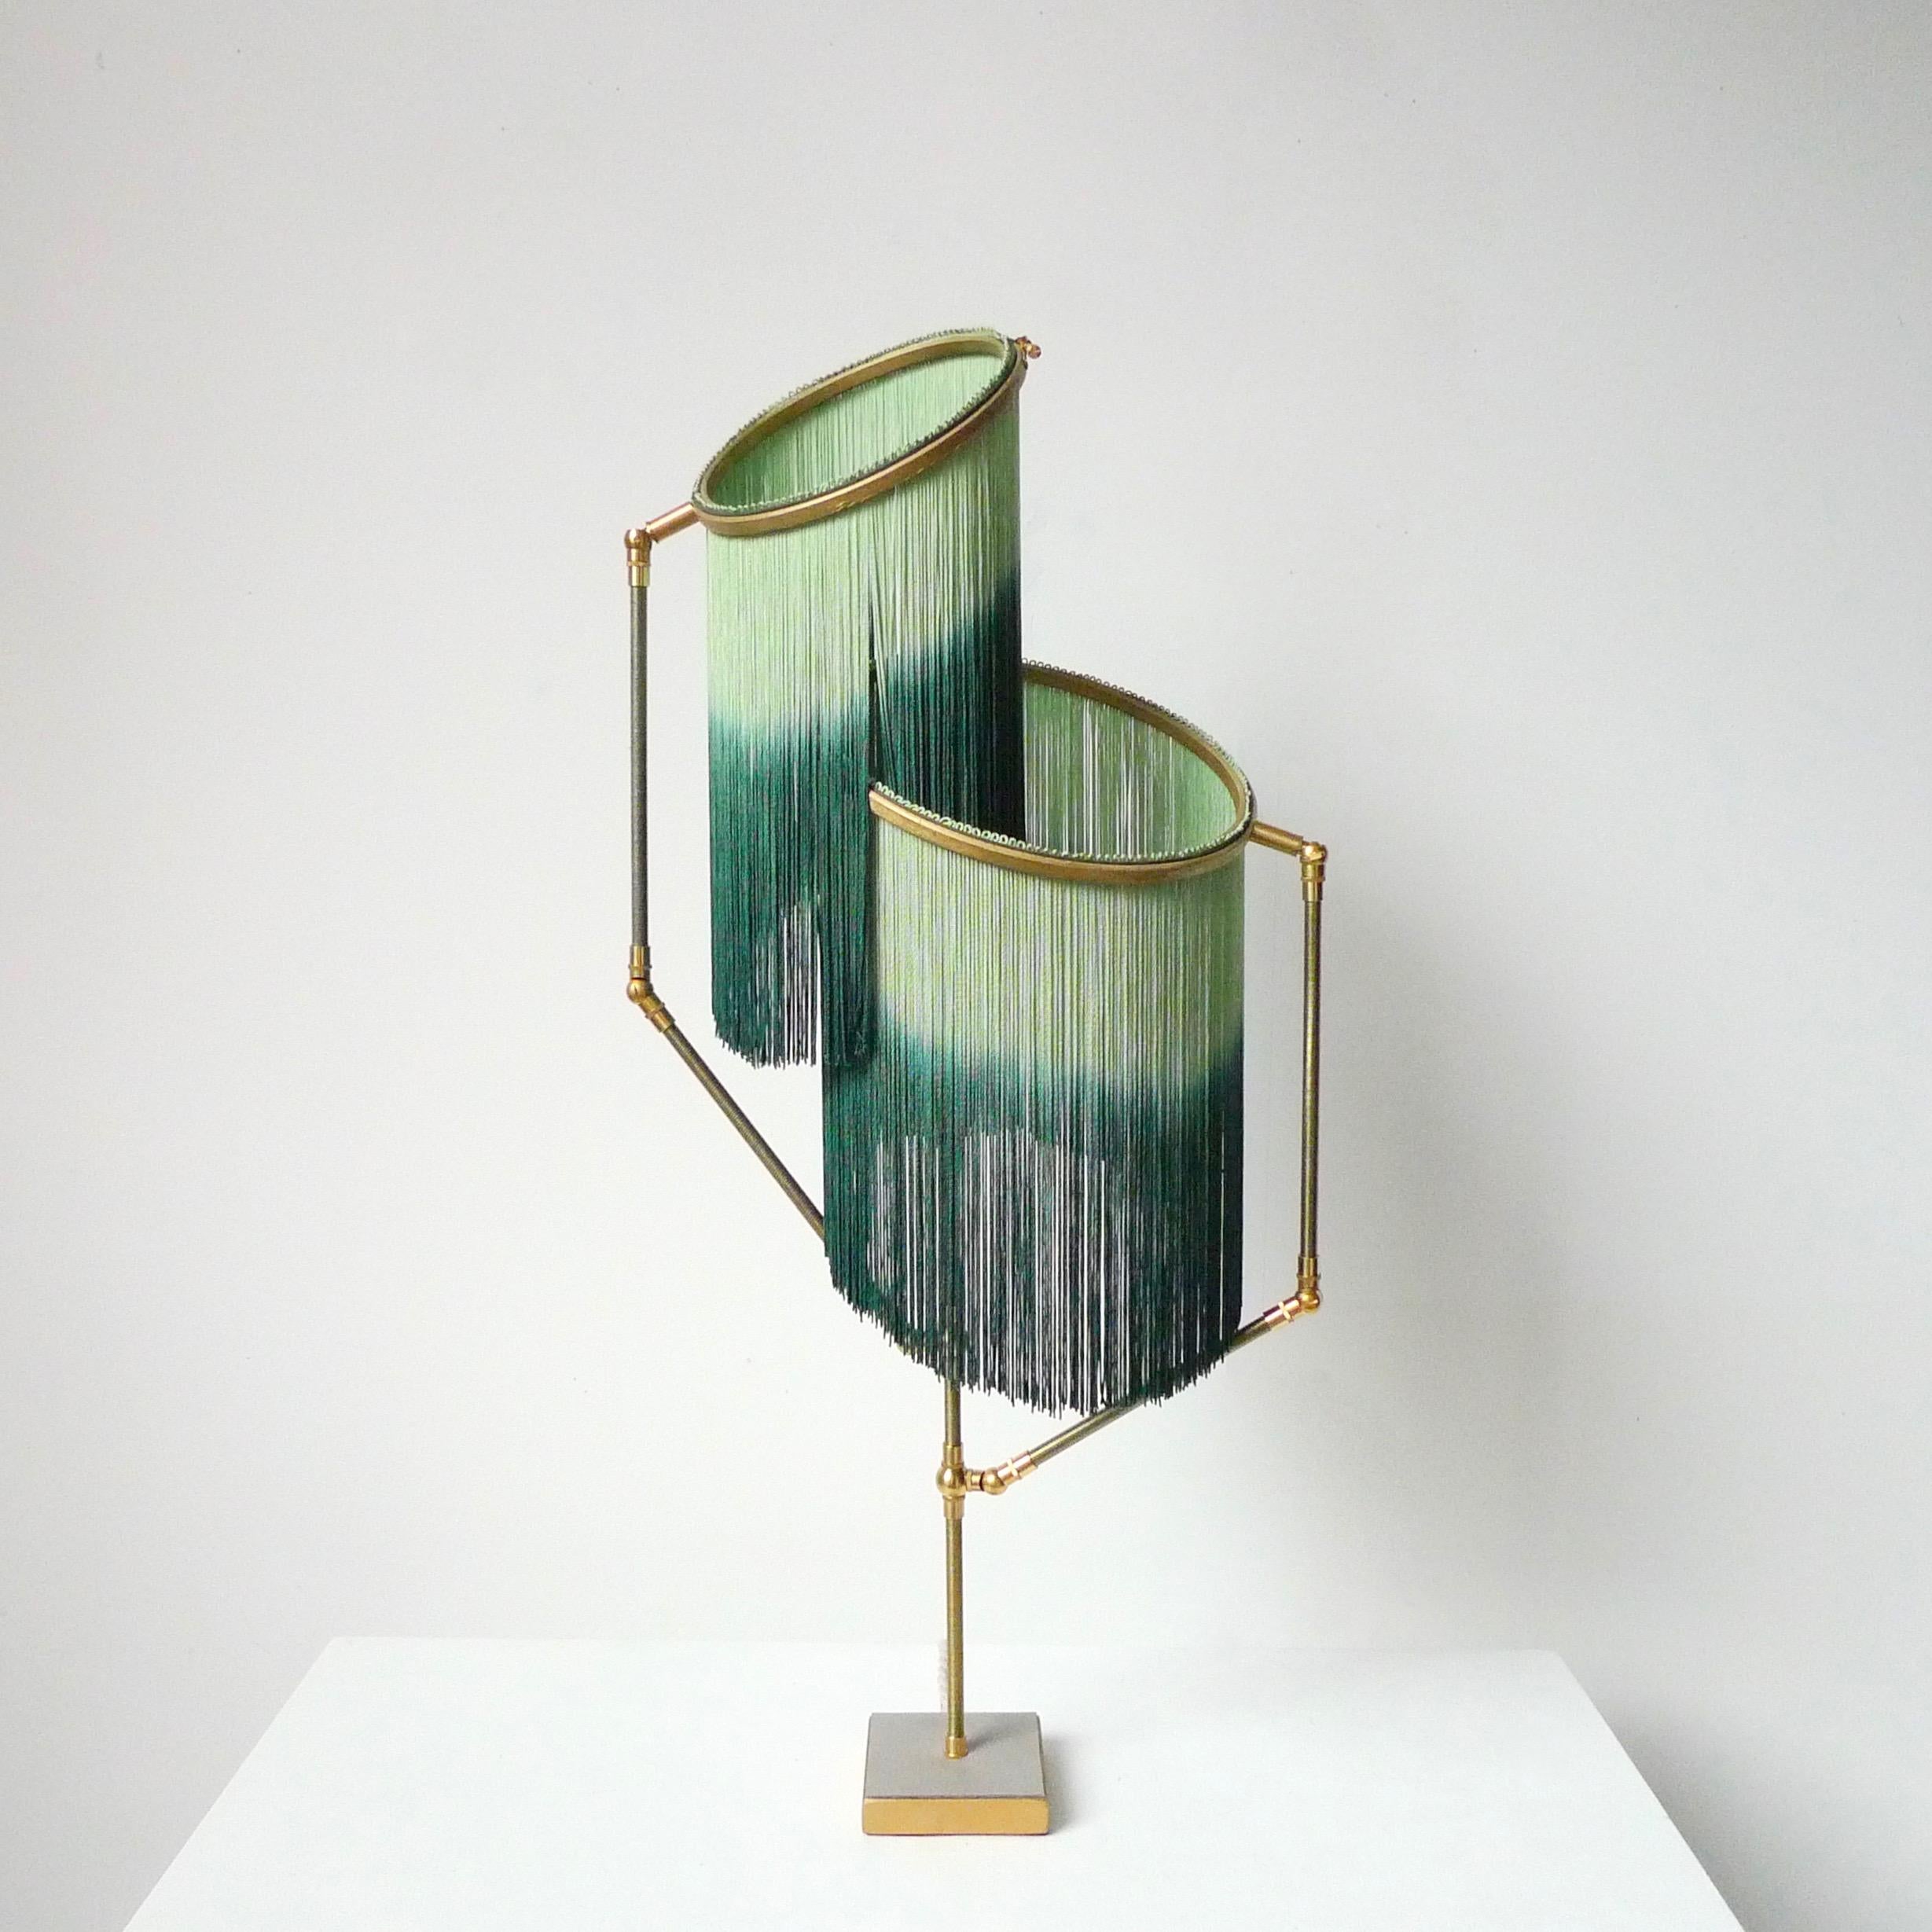 Green charme table lamp, Sander Bottinga

Dimensions: H 73 x W 38 x D 25 cm
Hand-sculpted in brass, leather, wood and dip dyed colored Fringes in viscose.
The movable arms makes it possible to move the circles with fringes in differed positions.
So